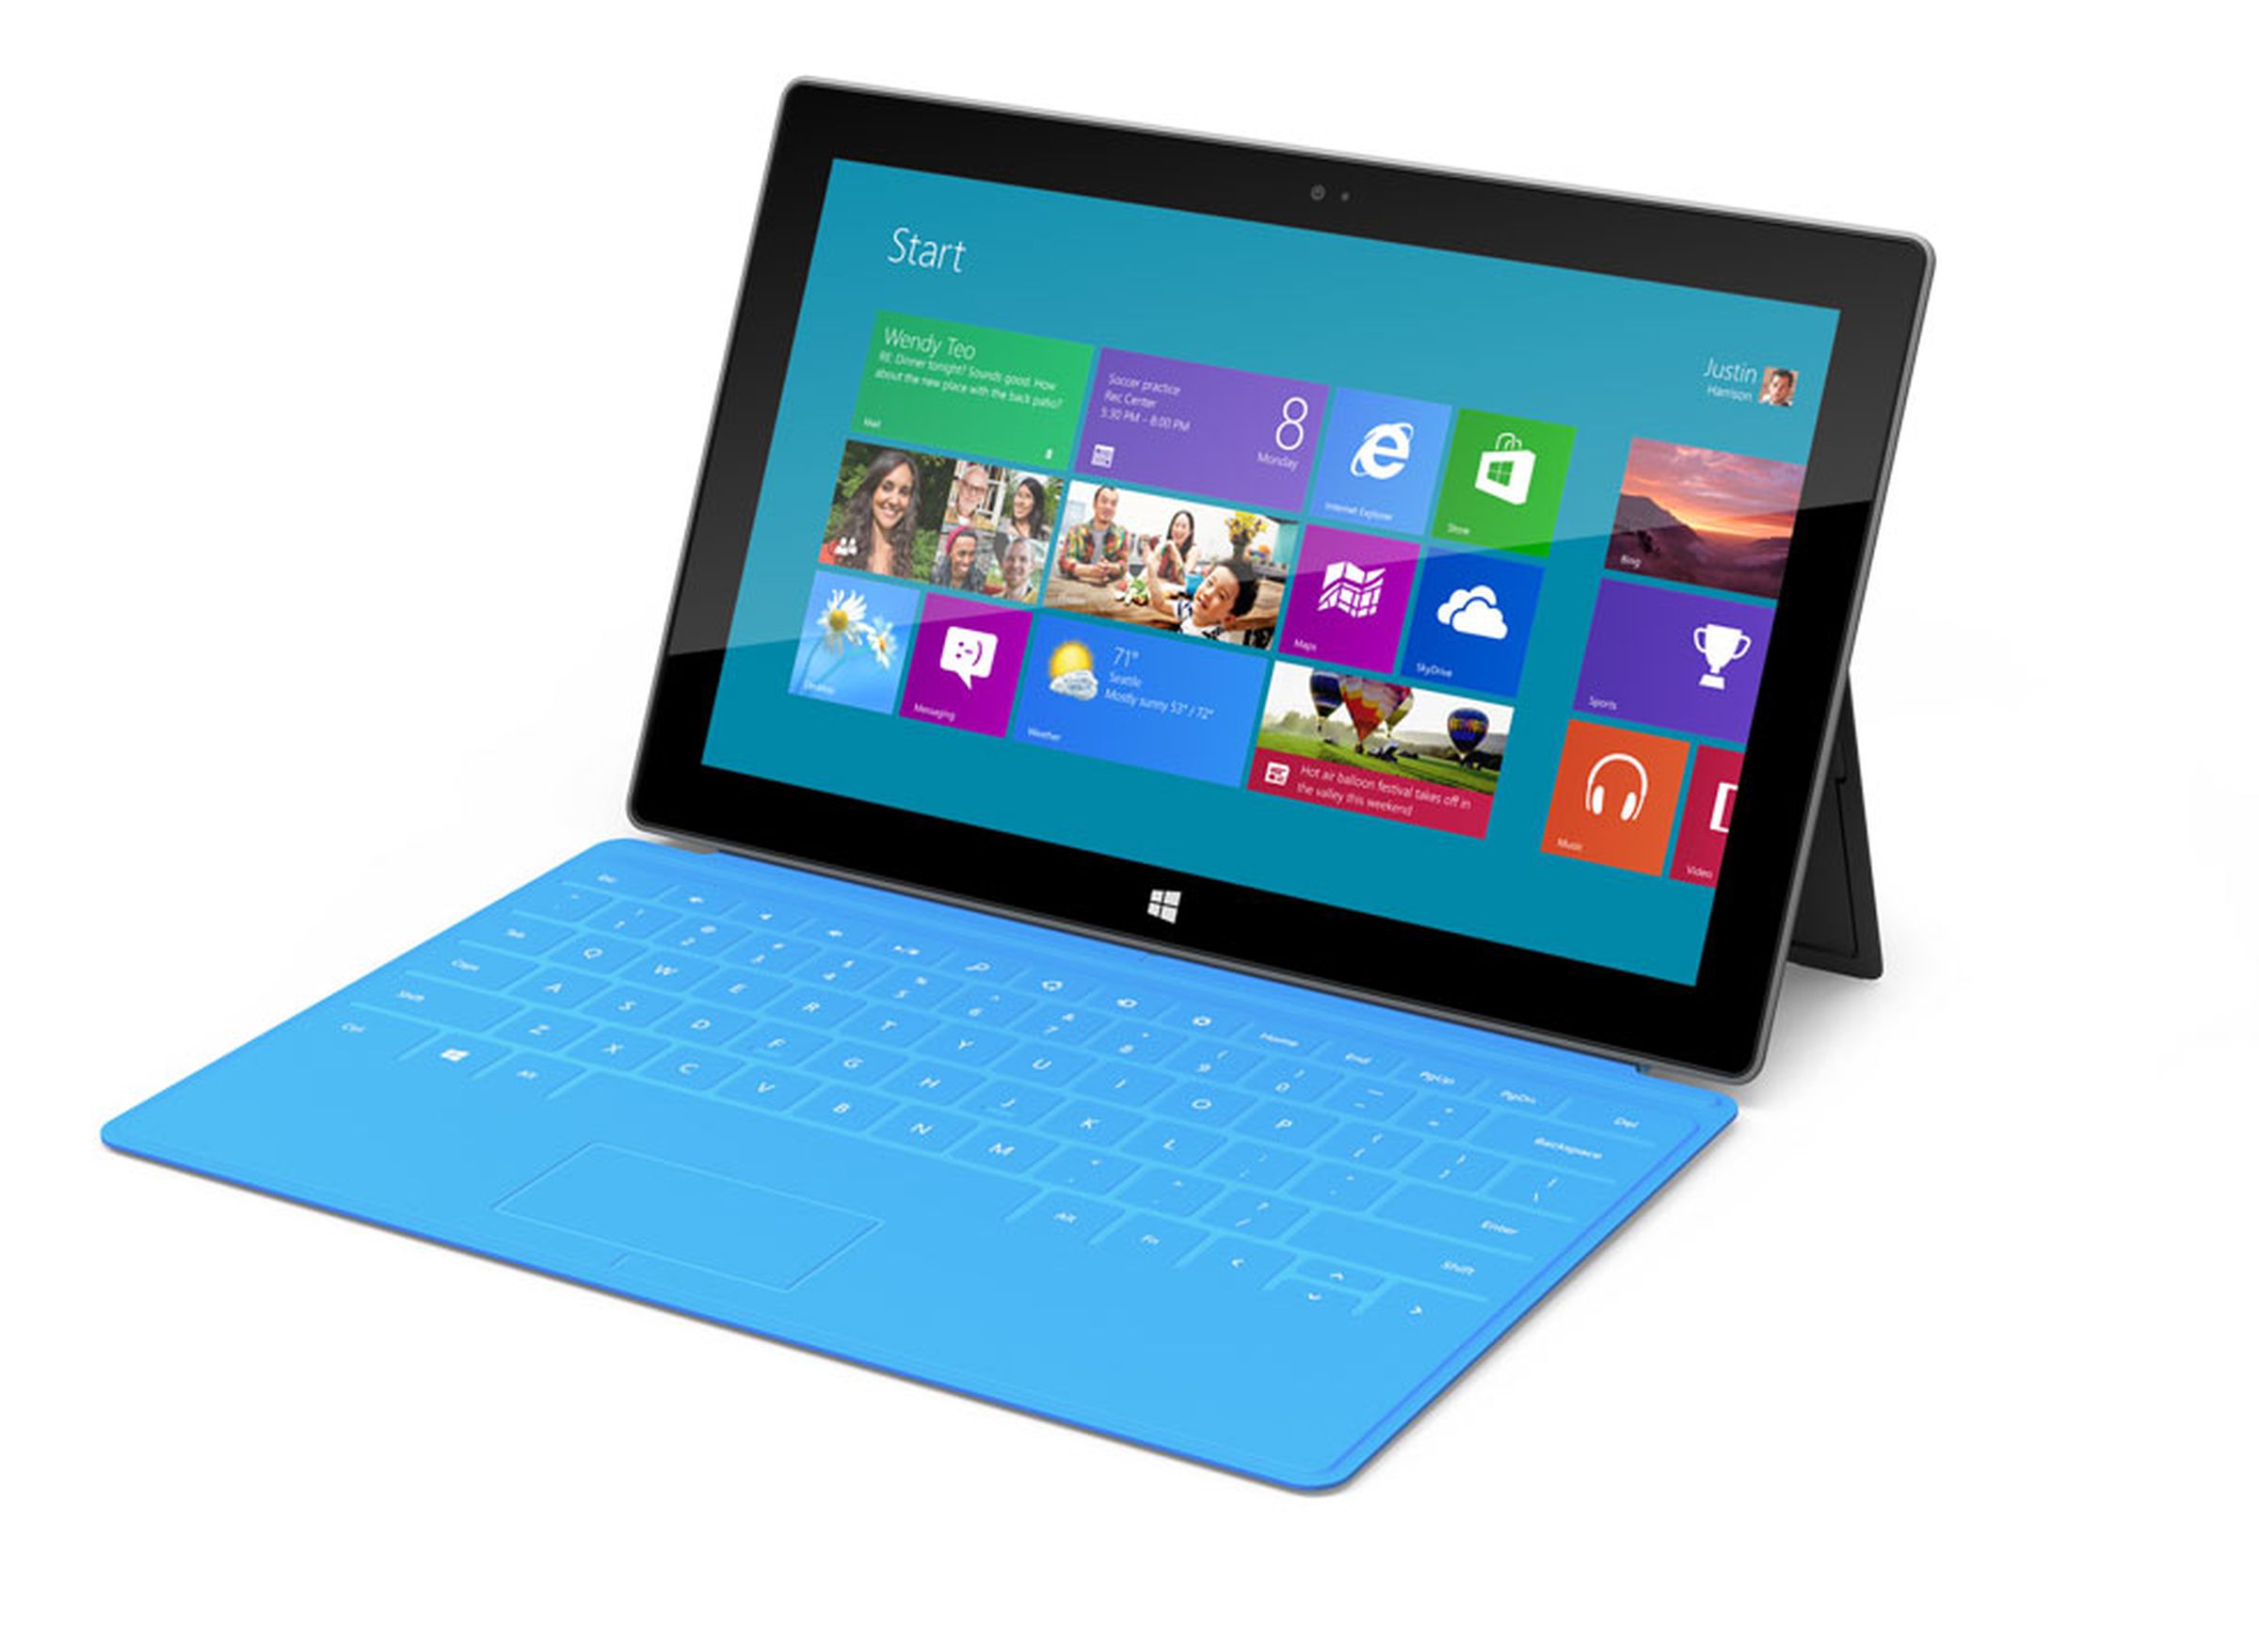 Microsoft Surface Touch Cover press photos